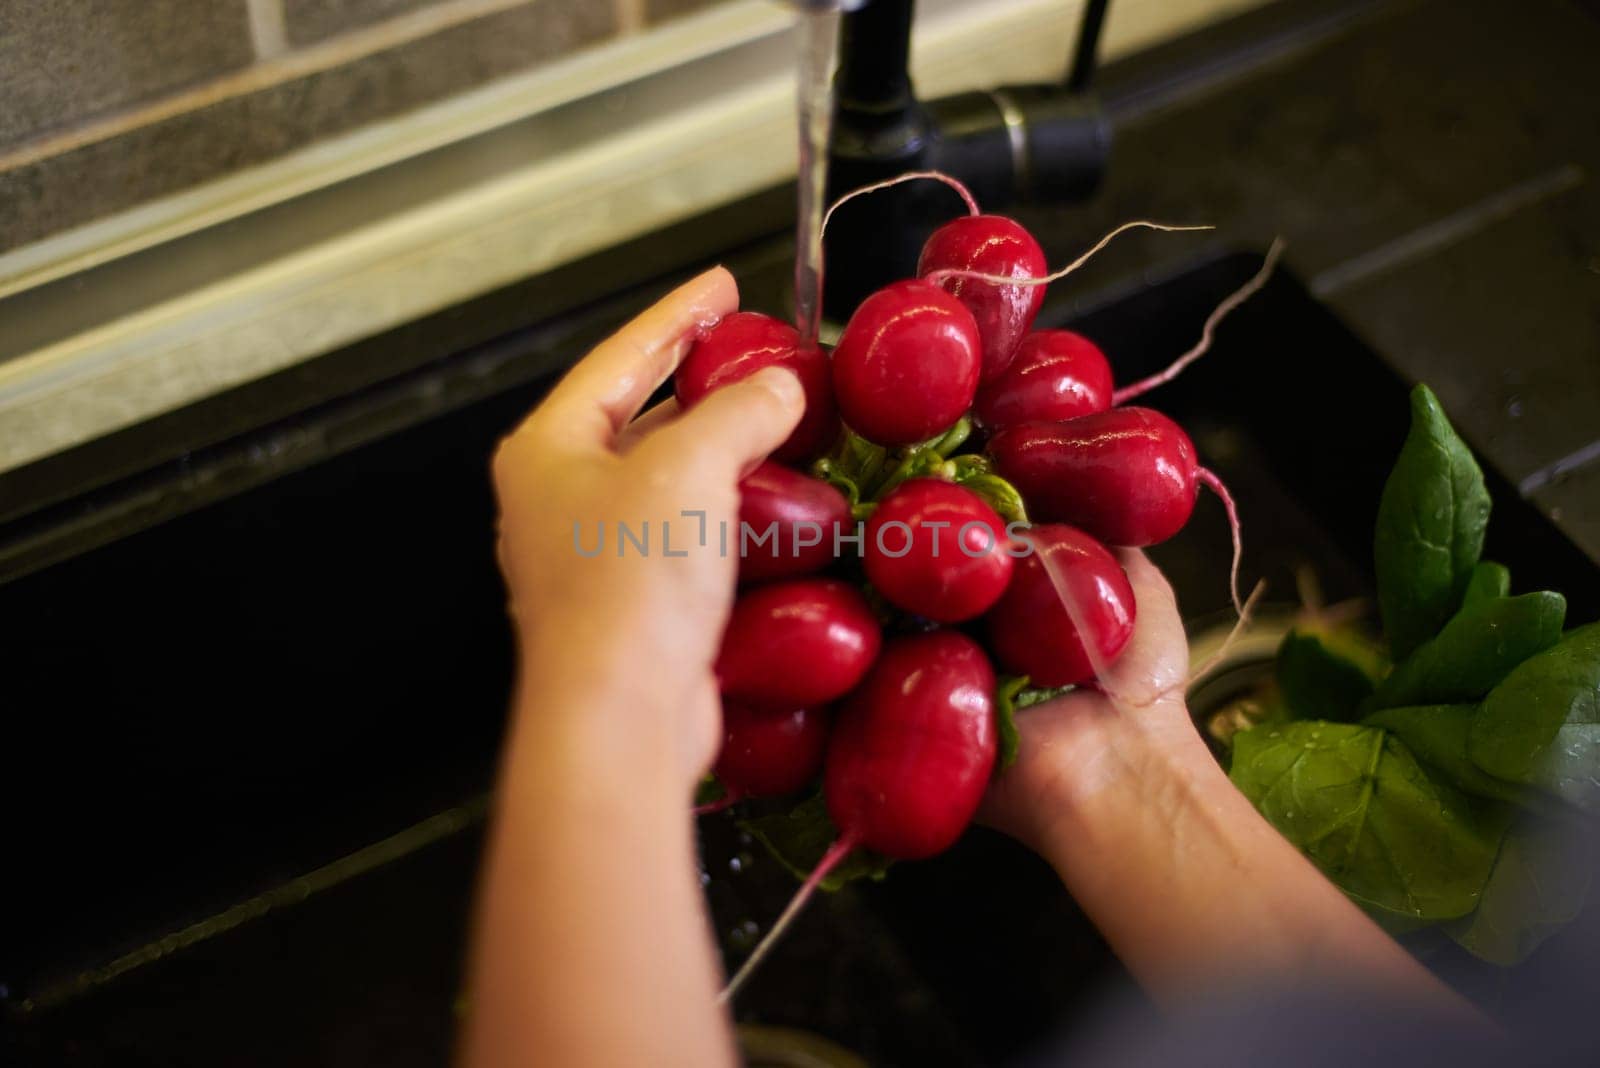 Hands of housewife washing fresh organic radish under flowing water in the kitchen sink. Healthy eating concept by artgf